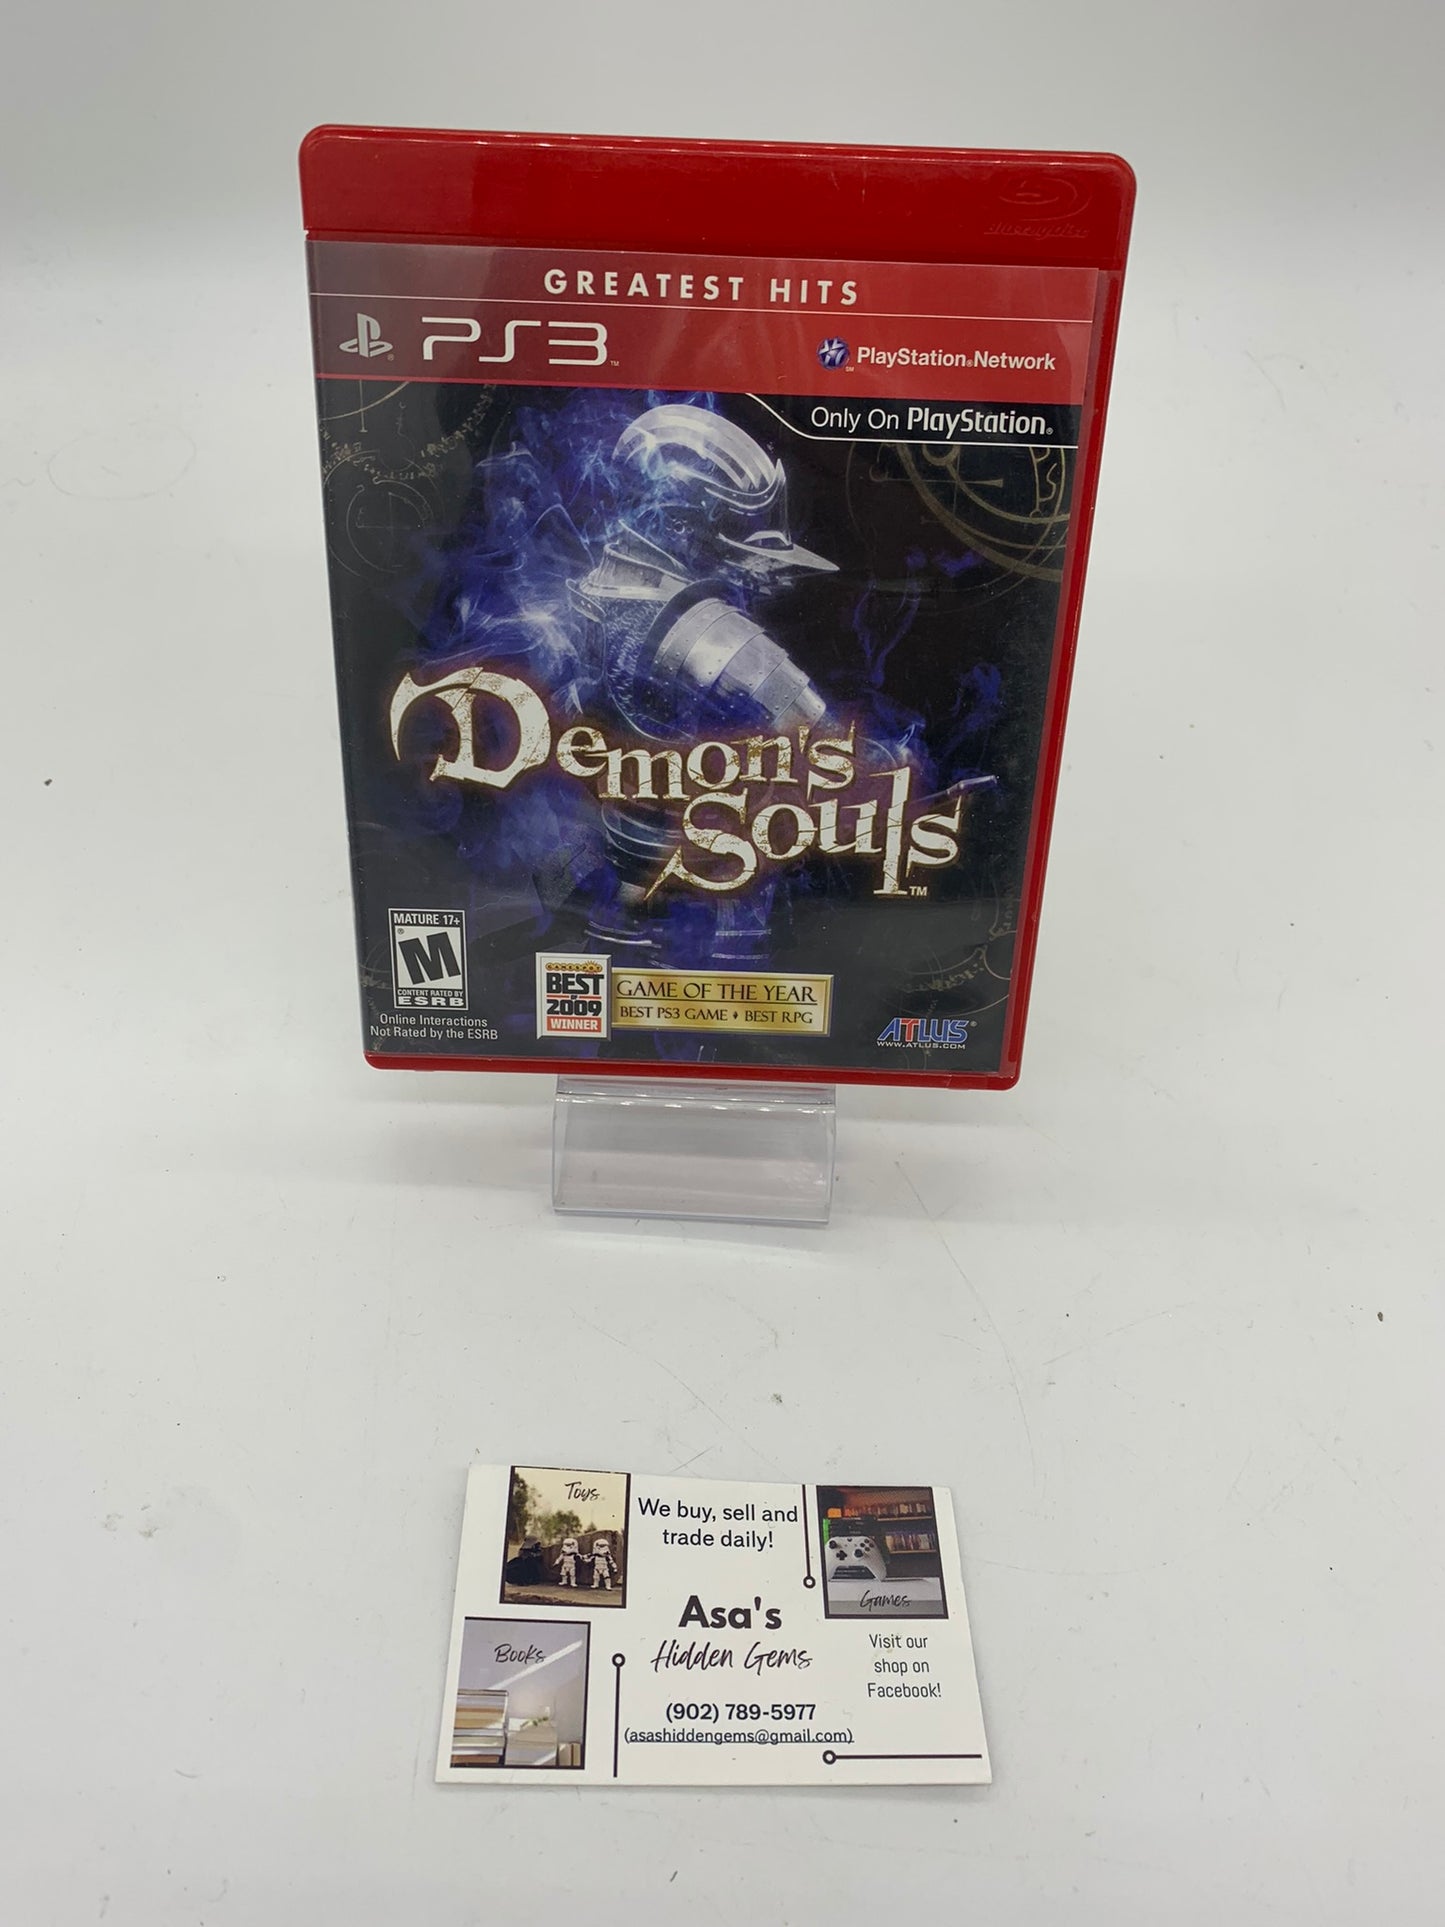 Demon's Souls - Greatest Hits (Sony PlayStation 3, 2009) PS3